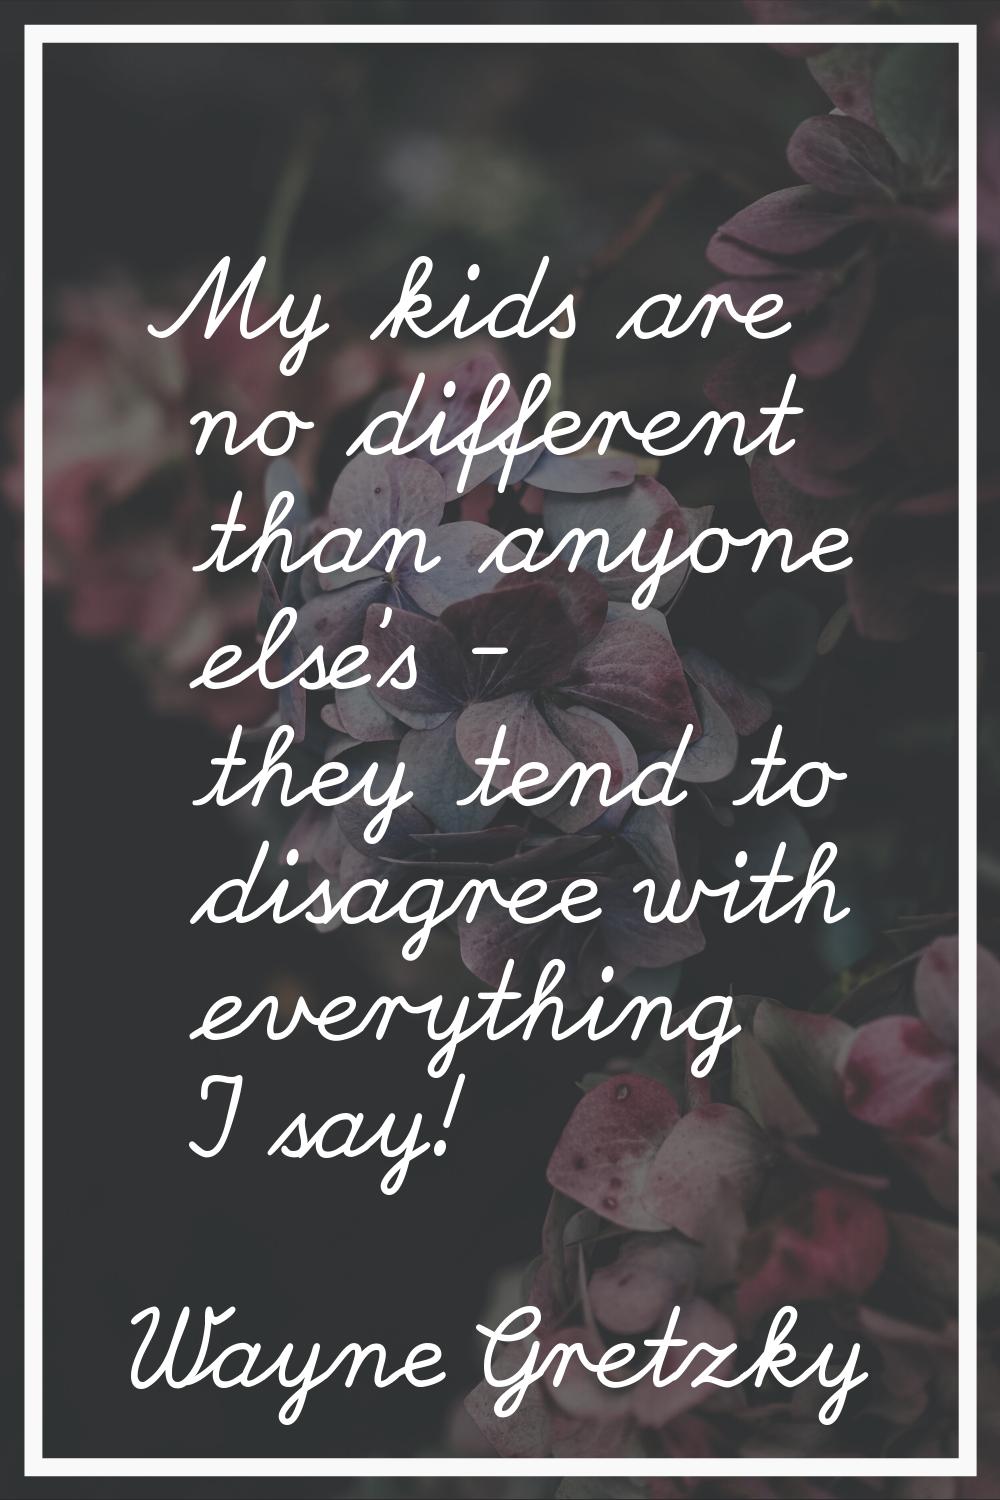 My kids are no different than anyone else's - they tend to disagree with everything I say!